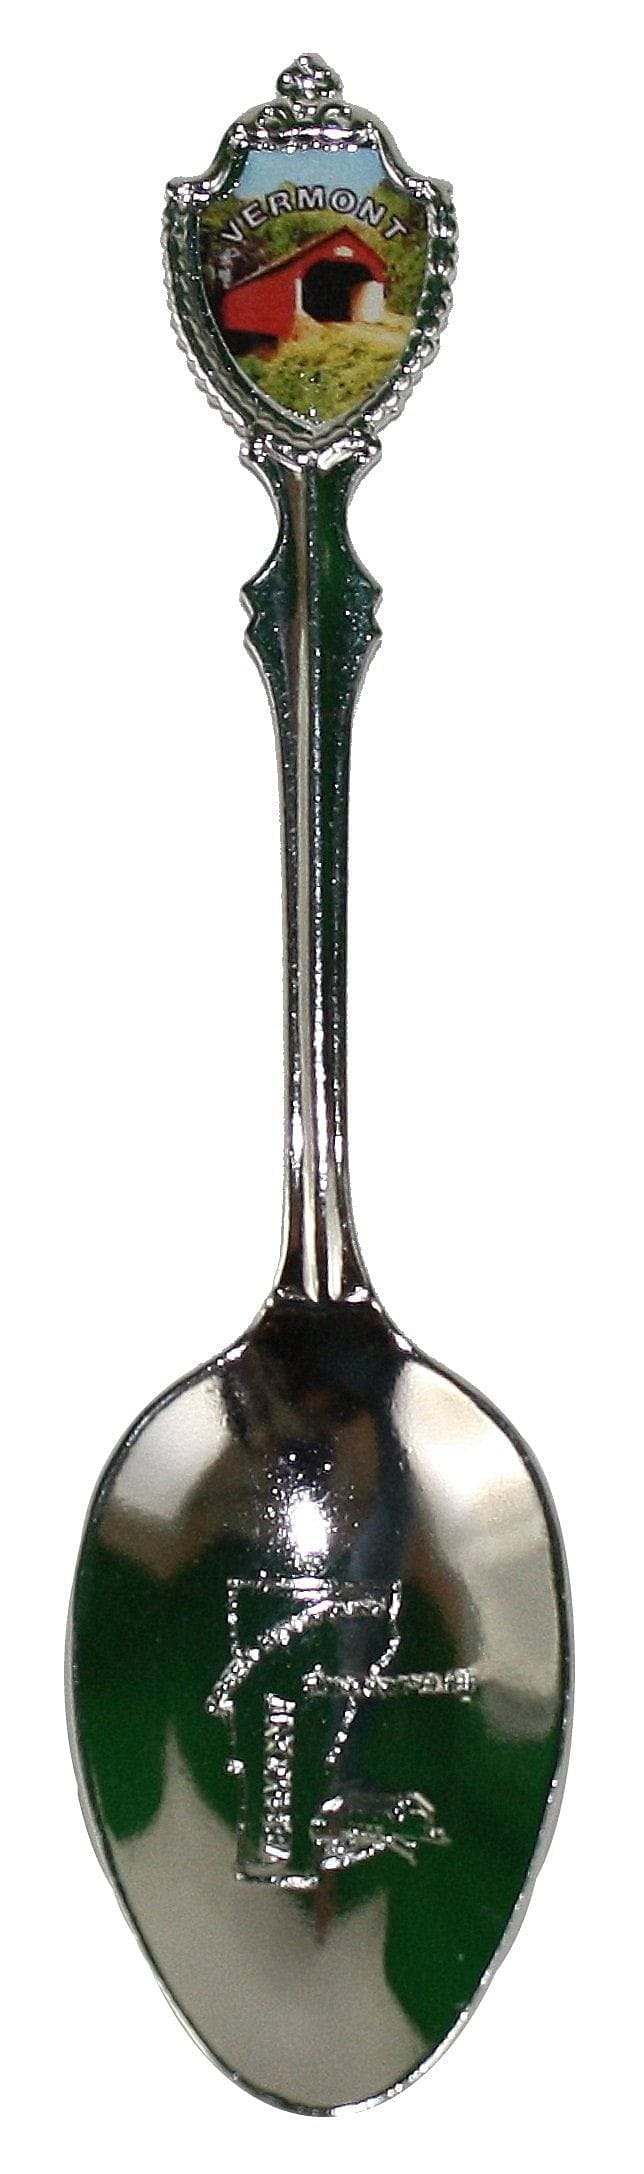 Glenncraft Spoon - - Shelburne Country Store